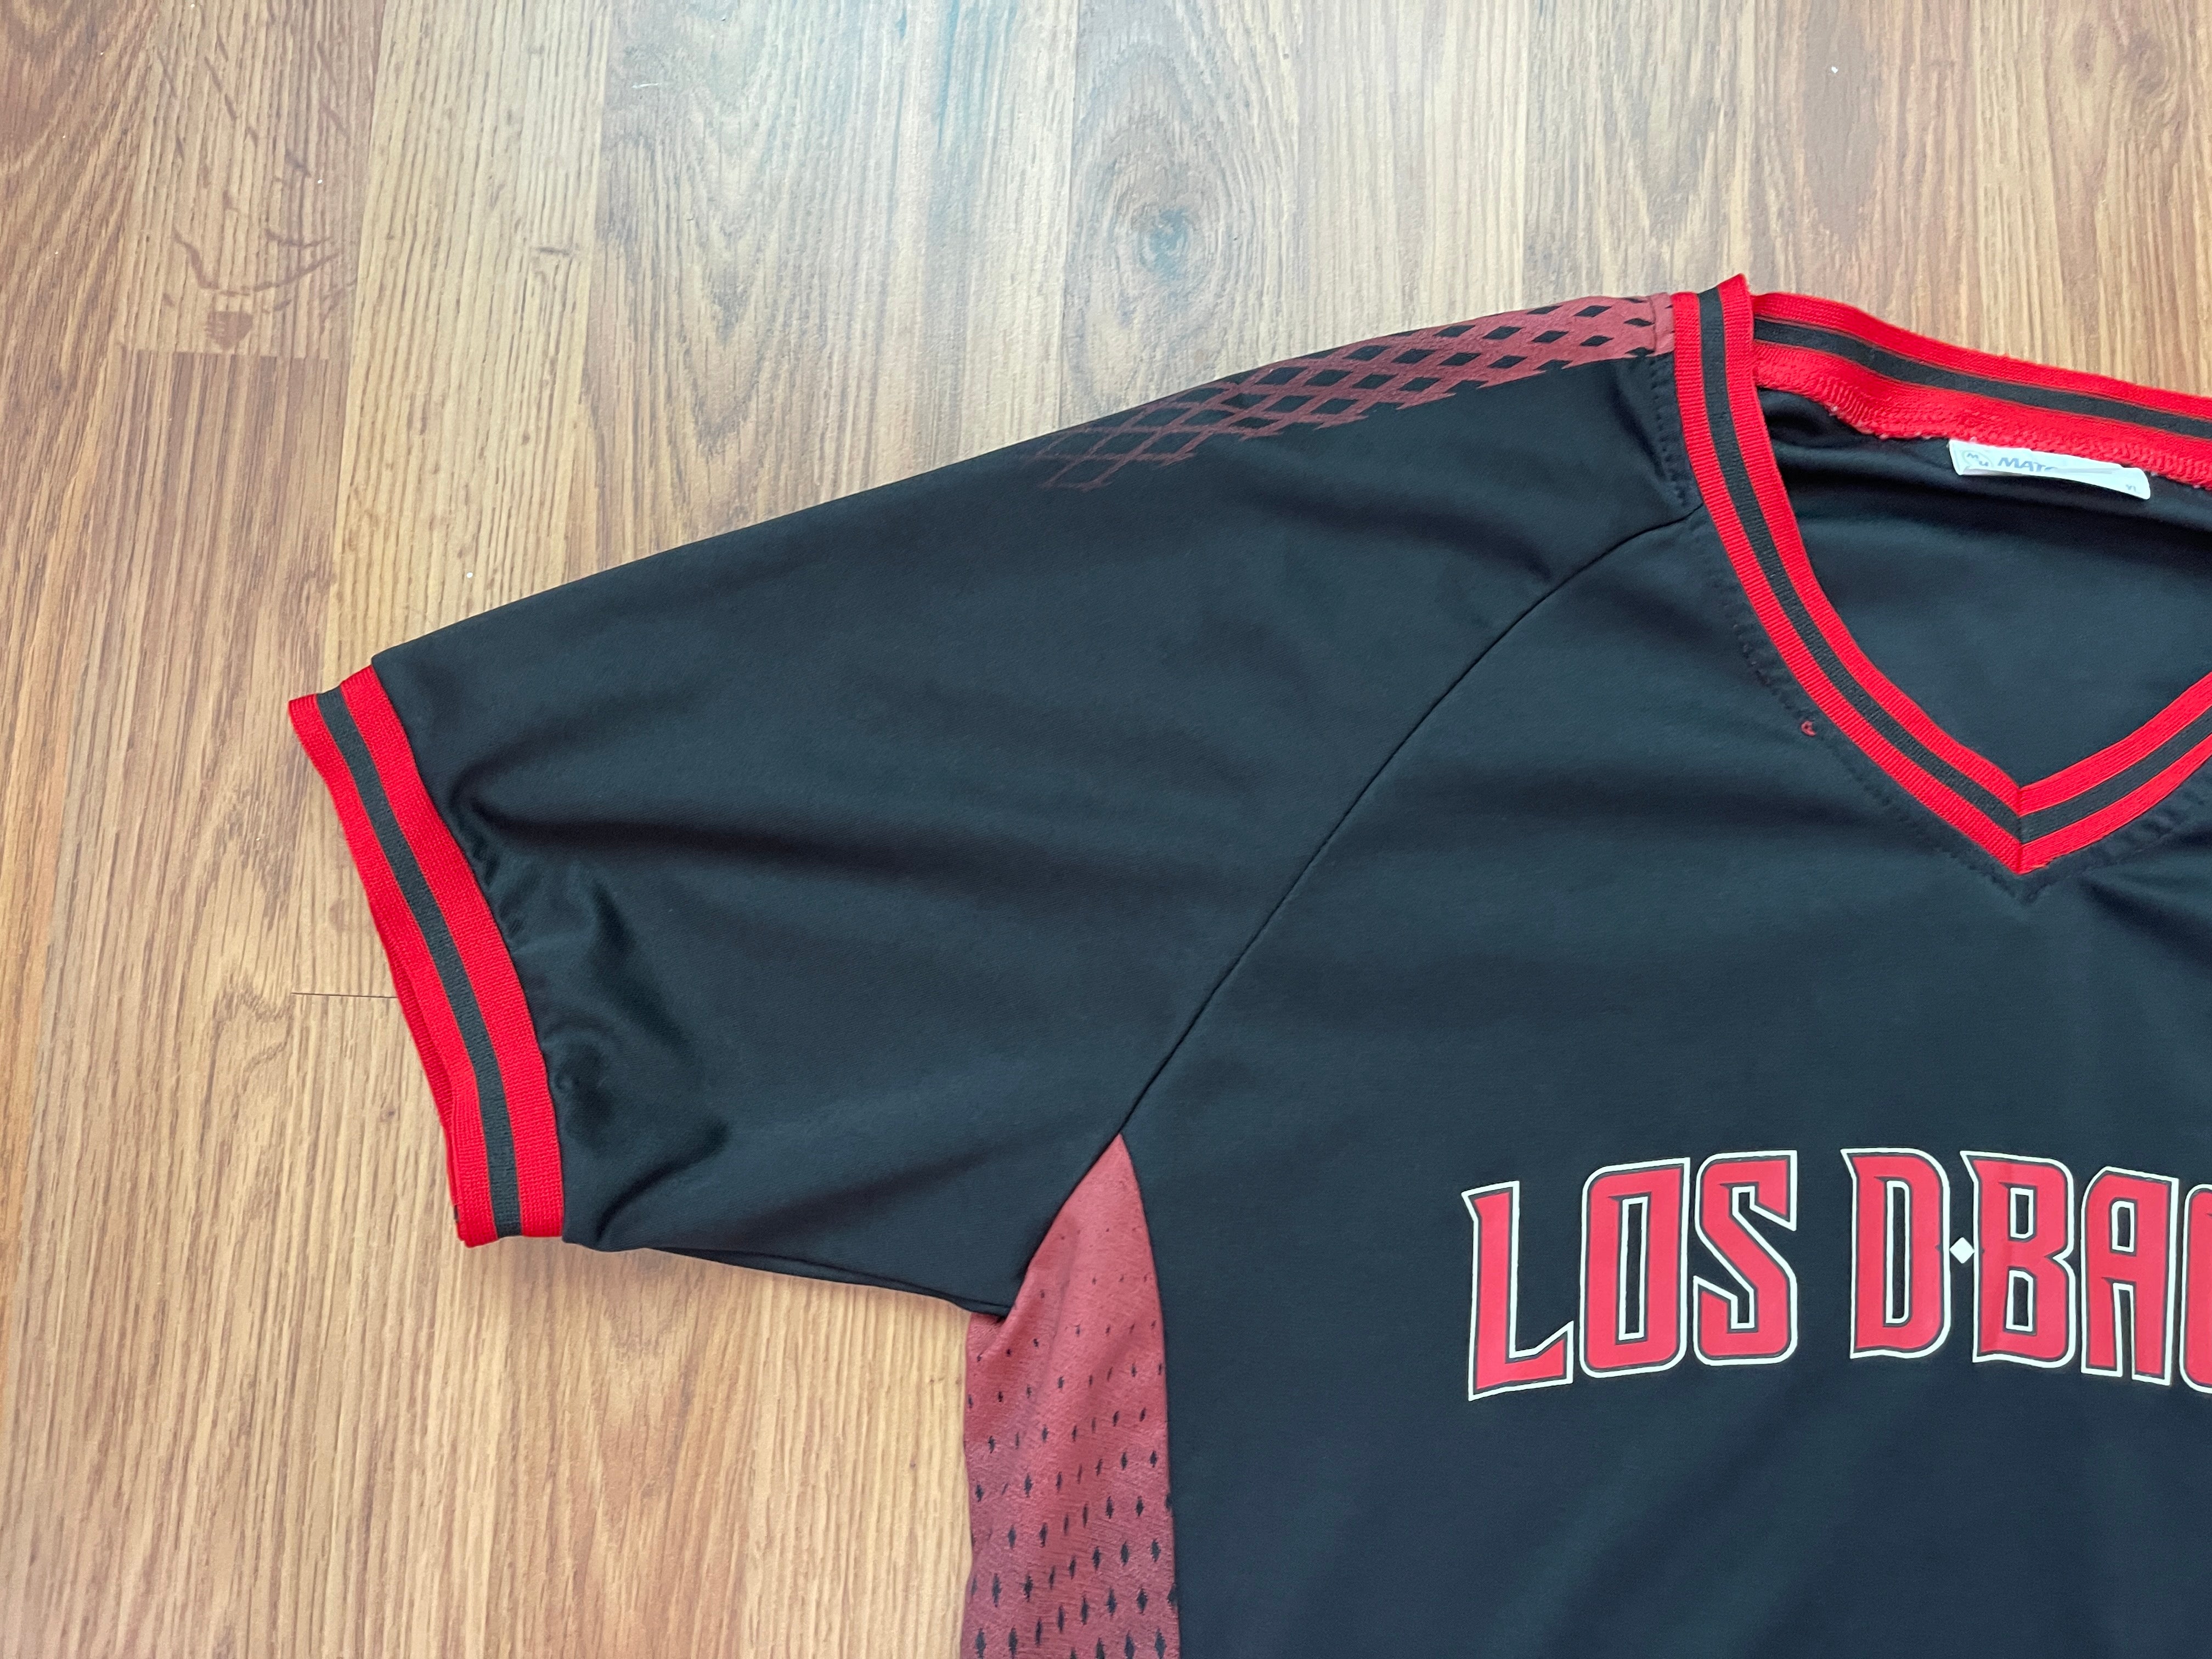 2016 Los D-backs Team-Issued Blank Jersey Size: 48